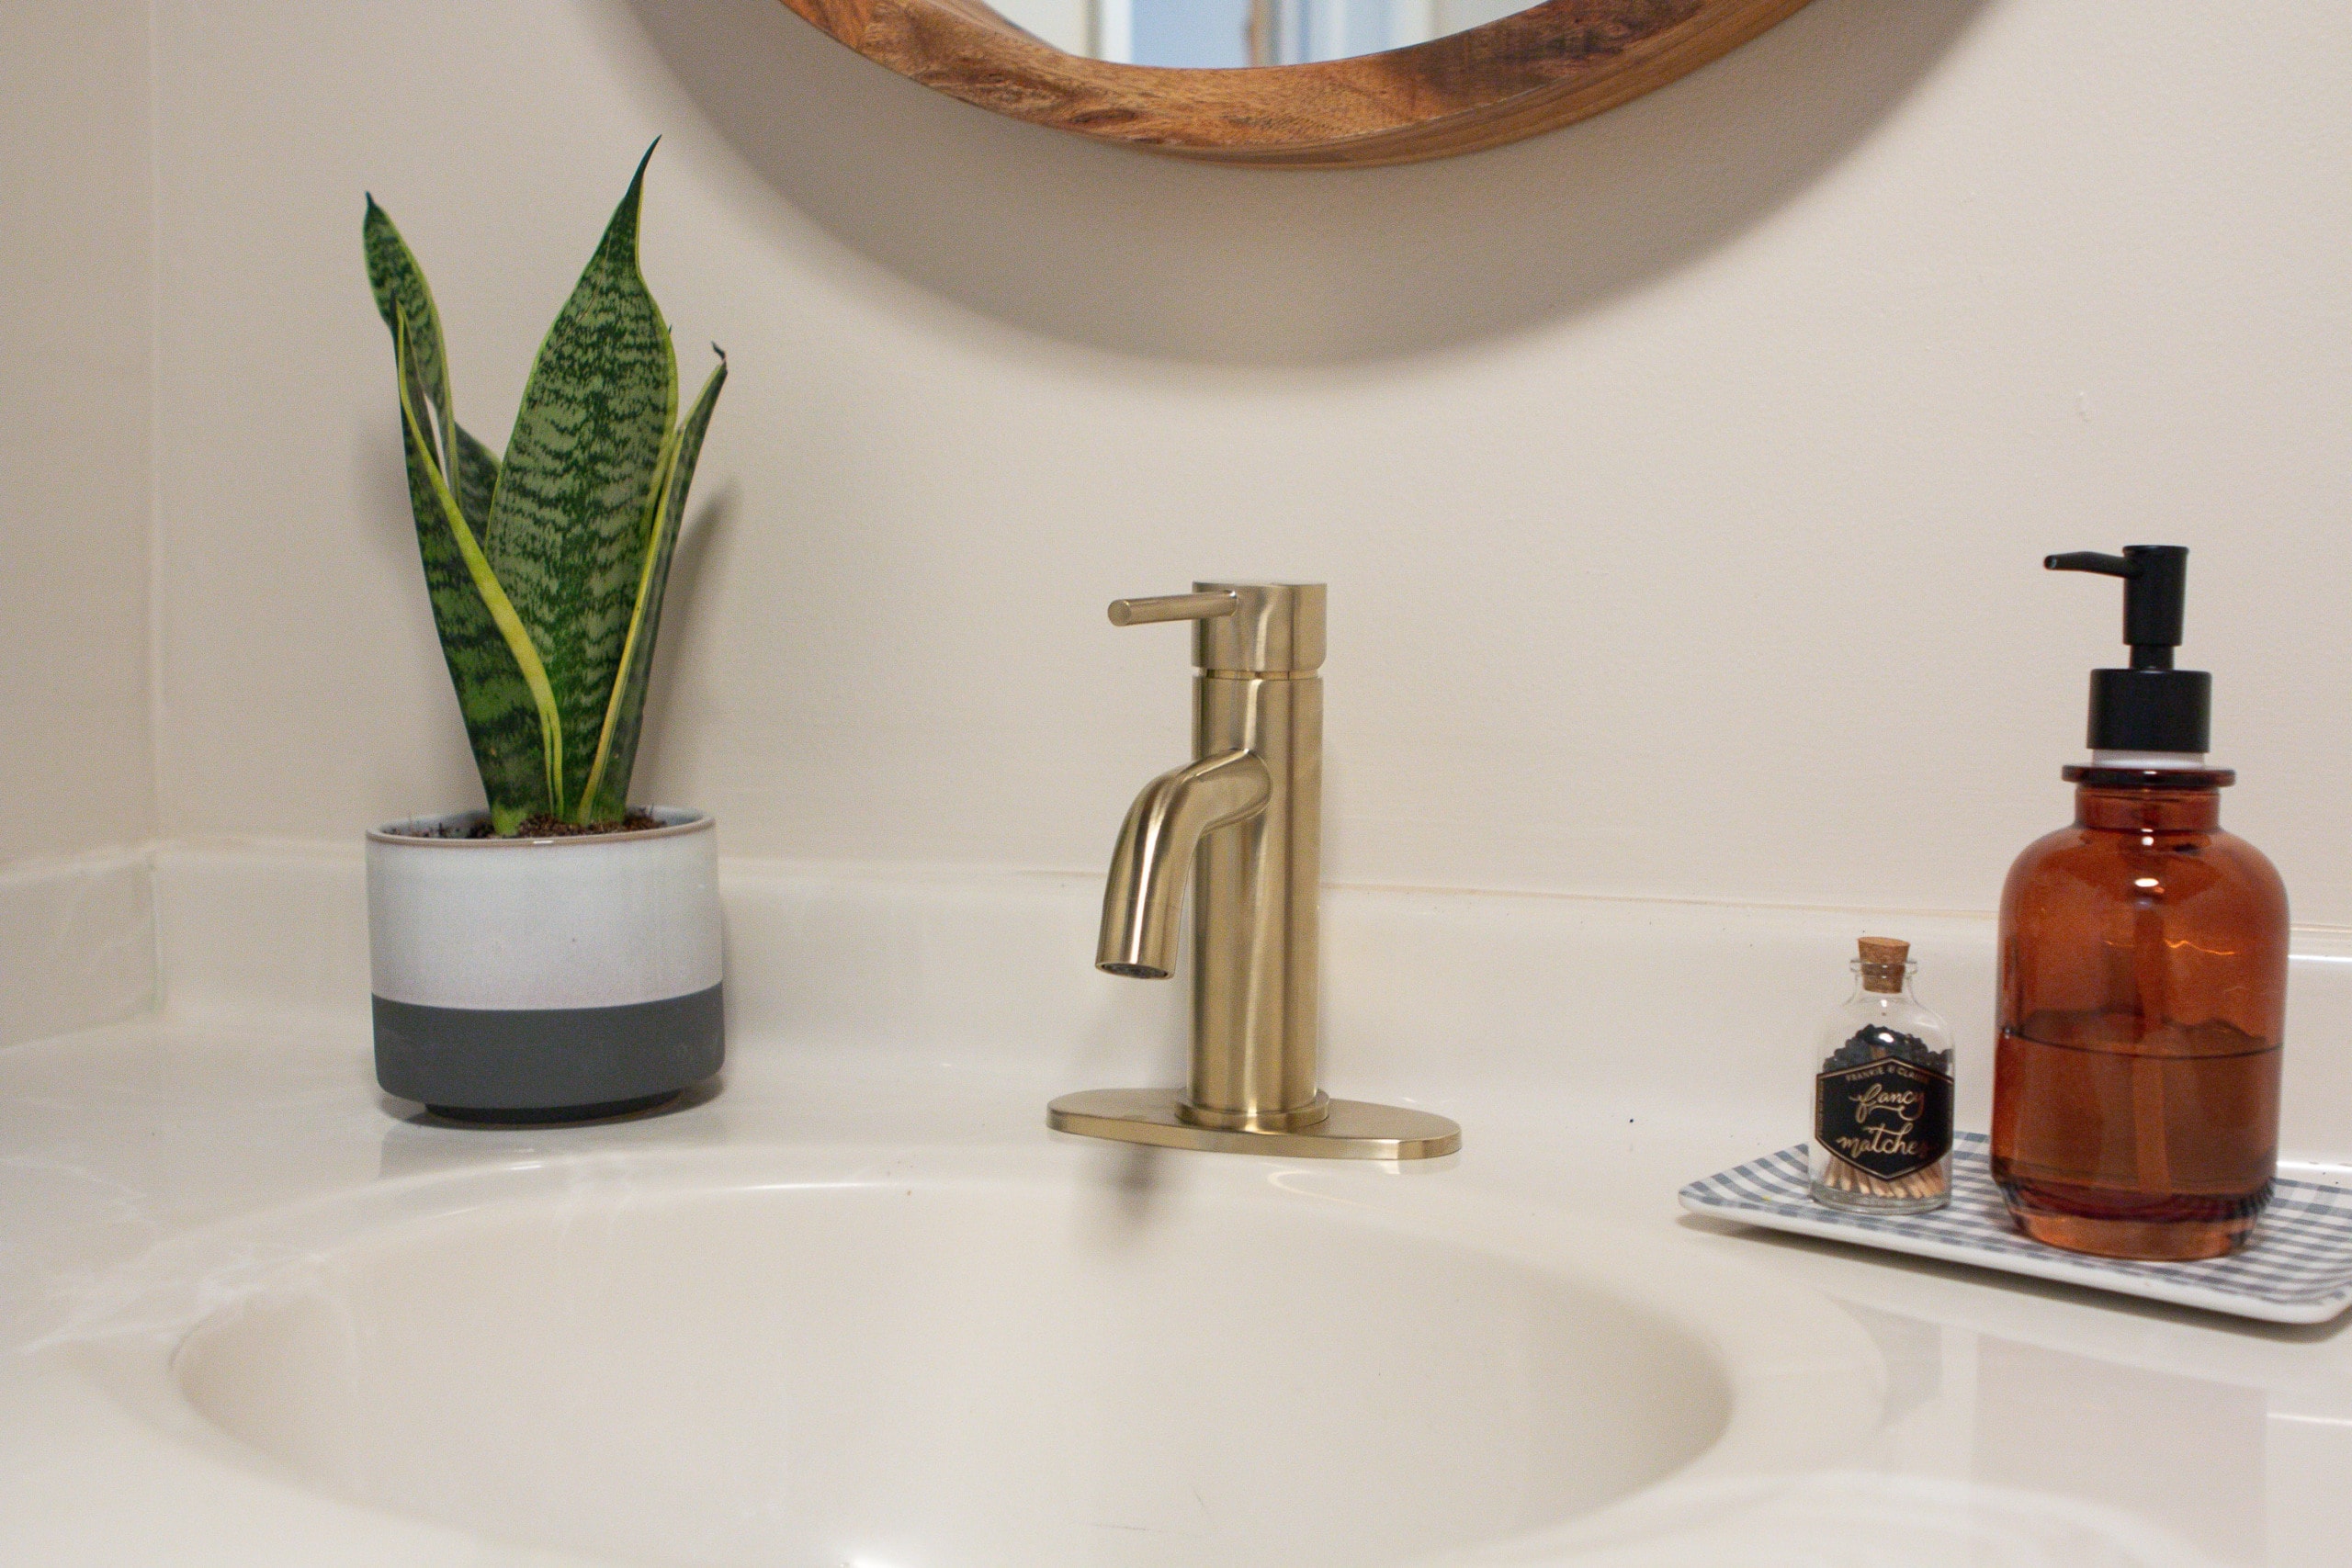 Tips to install a new bathroom faucet